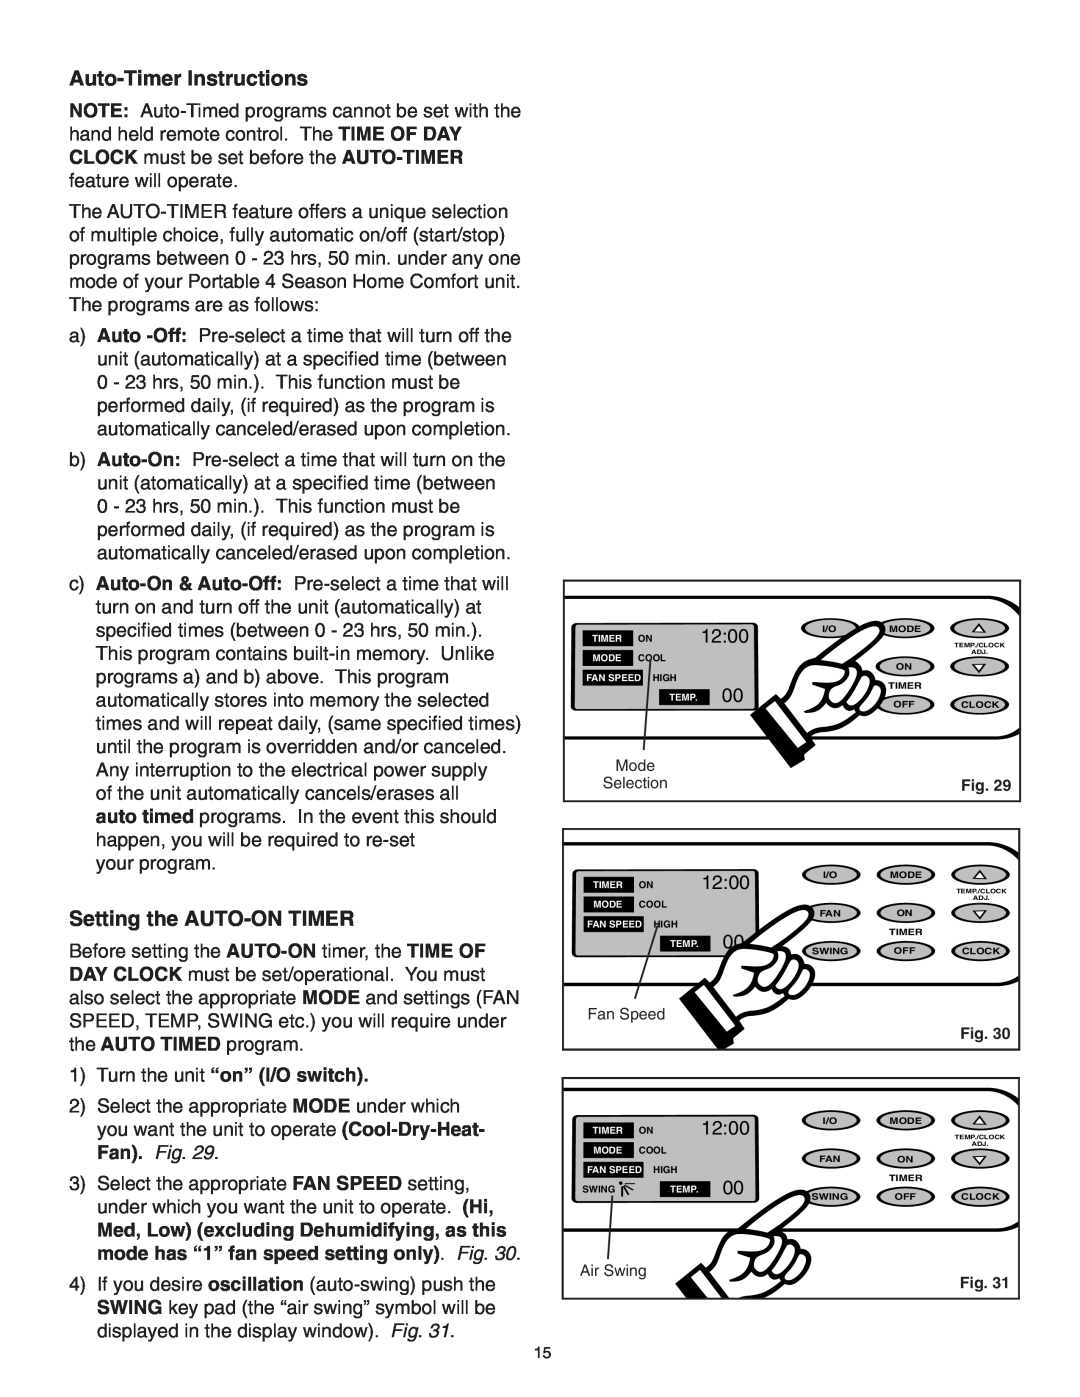 Danby SPAC8499 manual Auto-TimerInstructions, Setting the AUTO-ONTIMER, 1Turn the unit “on” I/O switch, 12:00 